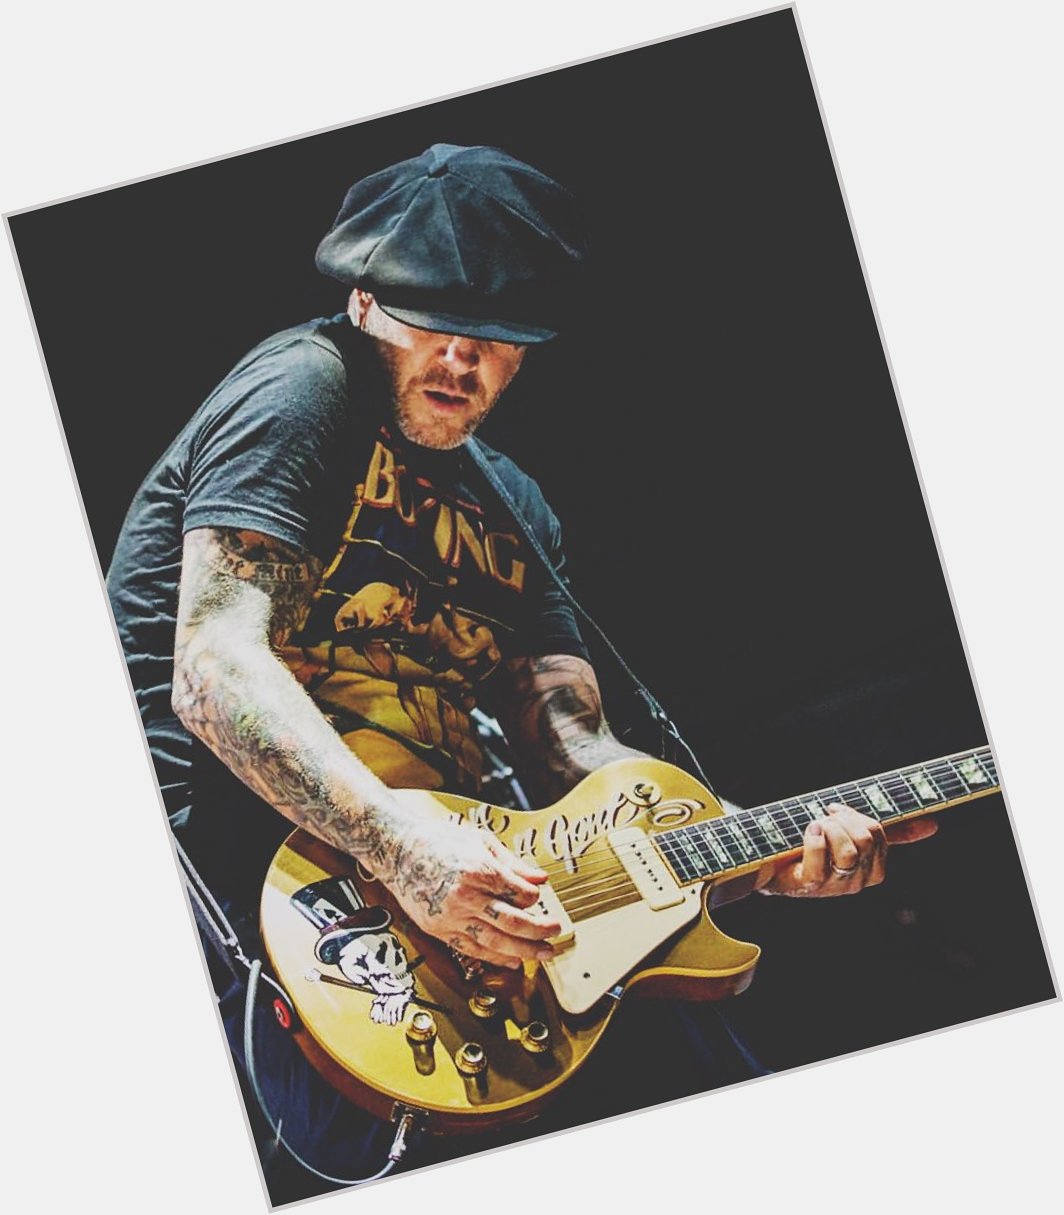 Happy birthday to Social Distortion founder, lead vocalist, lead guitarist, producer and songwriter Mike Ness. 